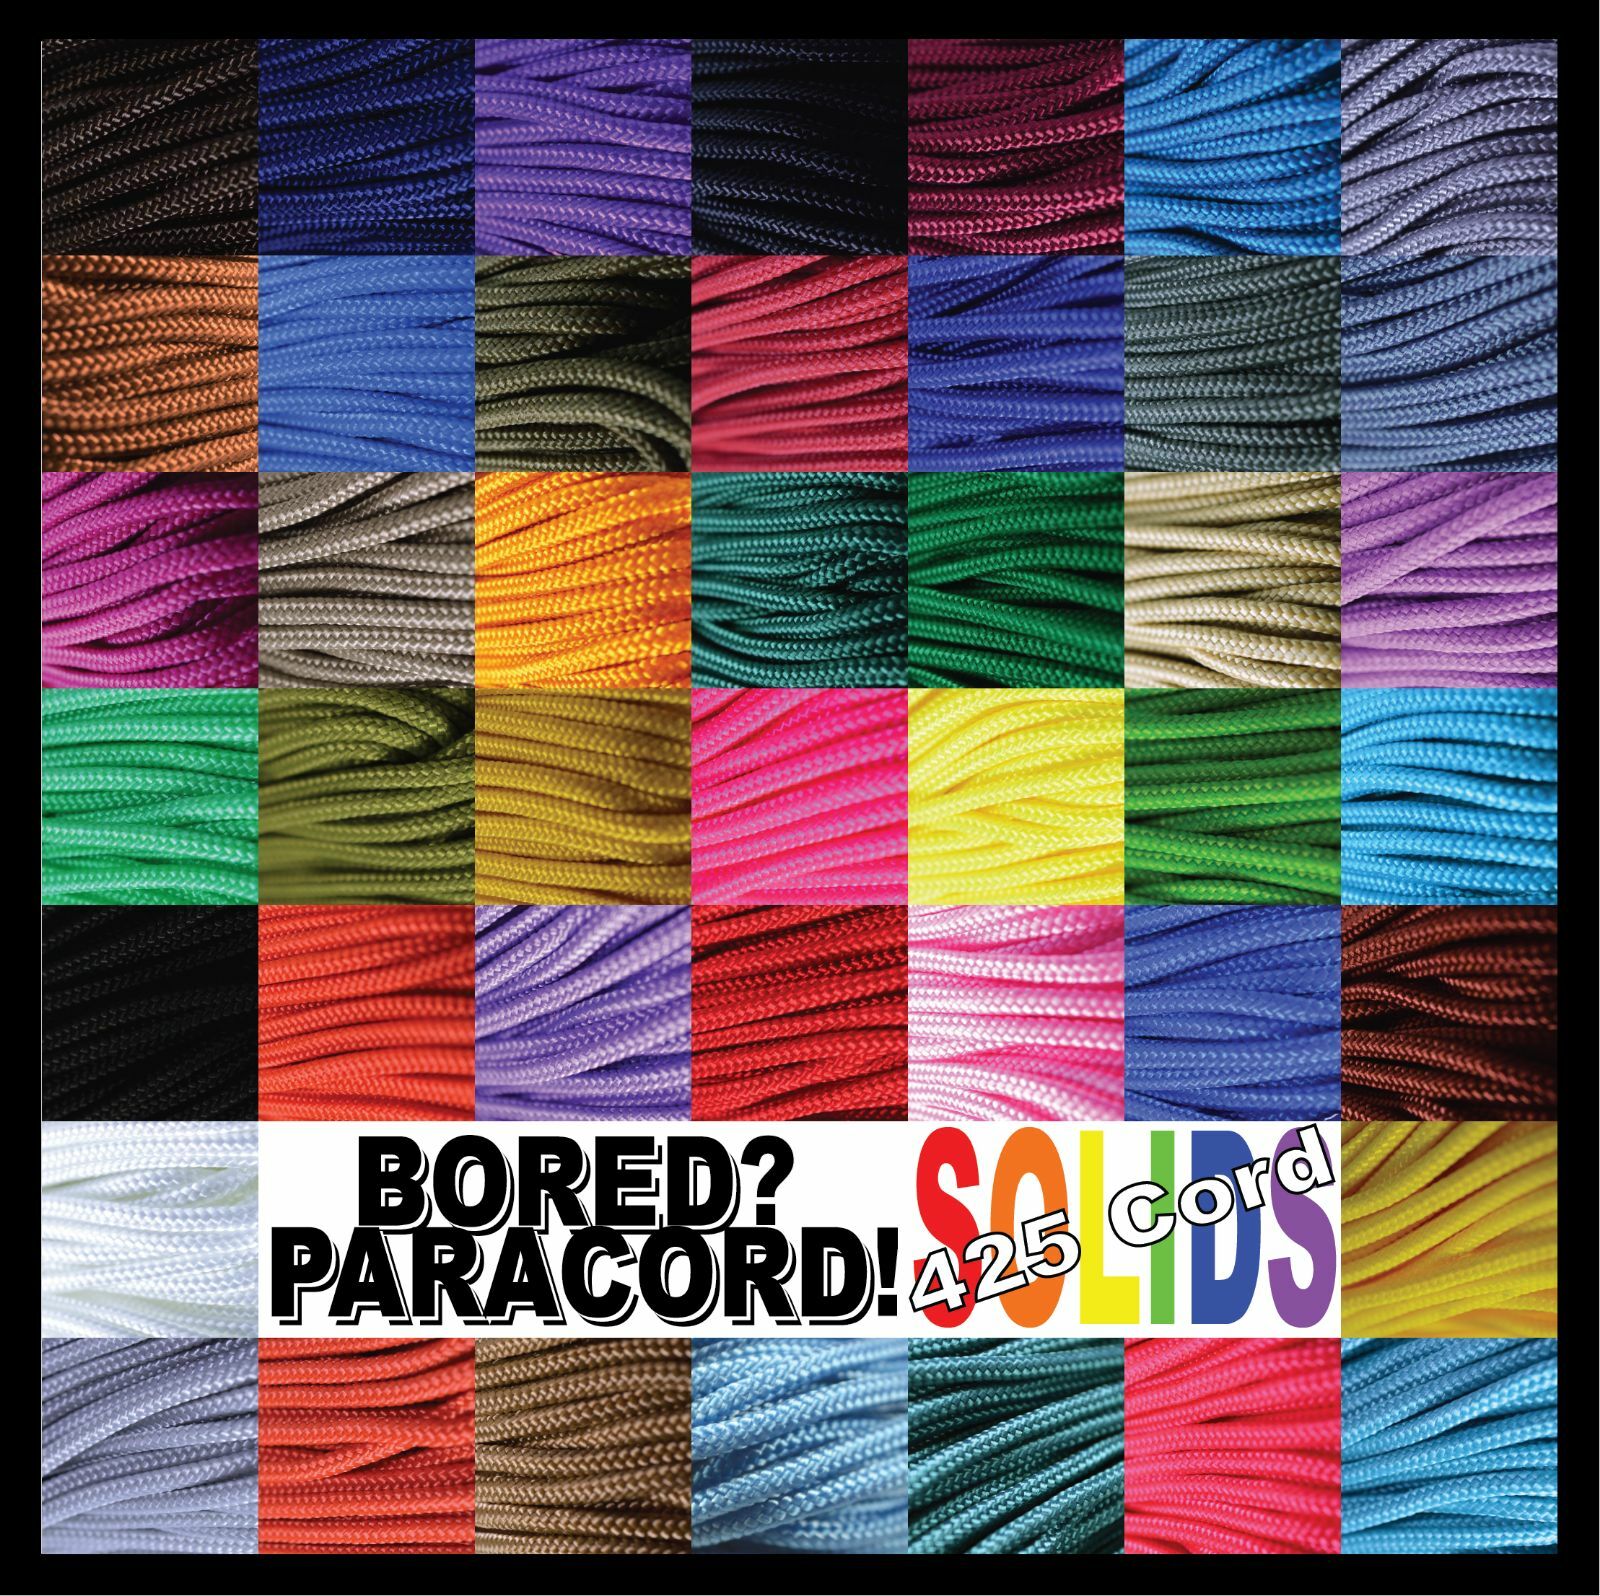 425 Paracord Rope 3 Strand Cord - 100 Feet - 44 Solid Colors